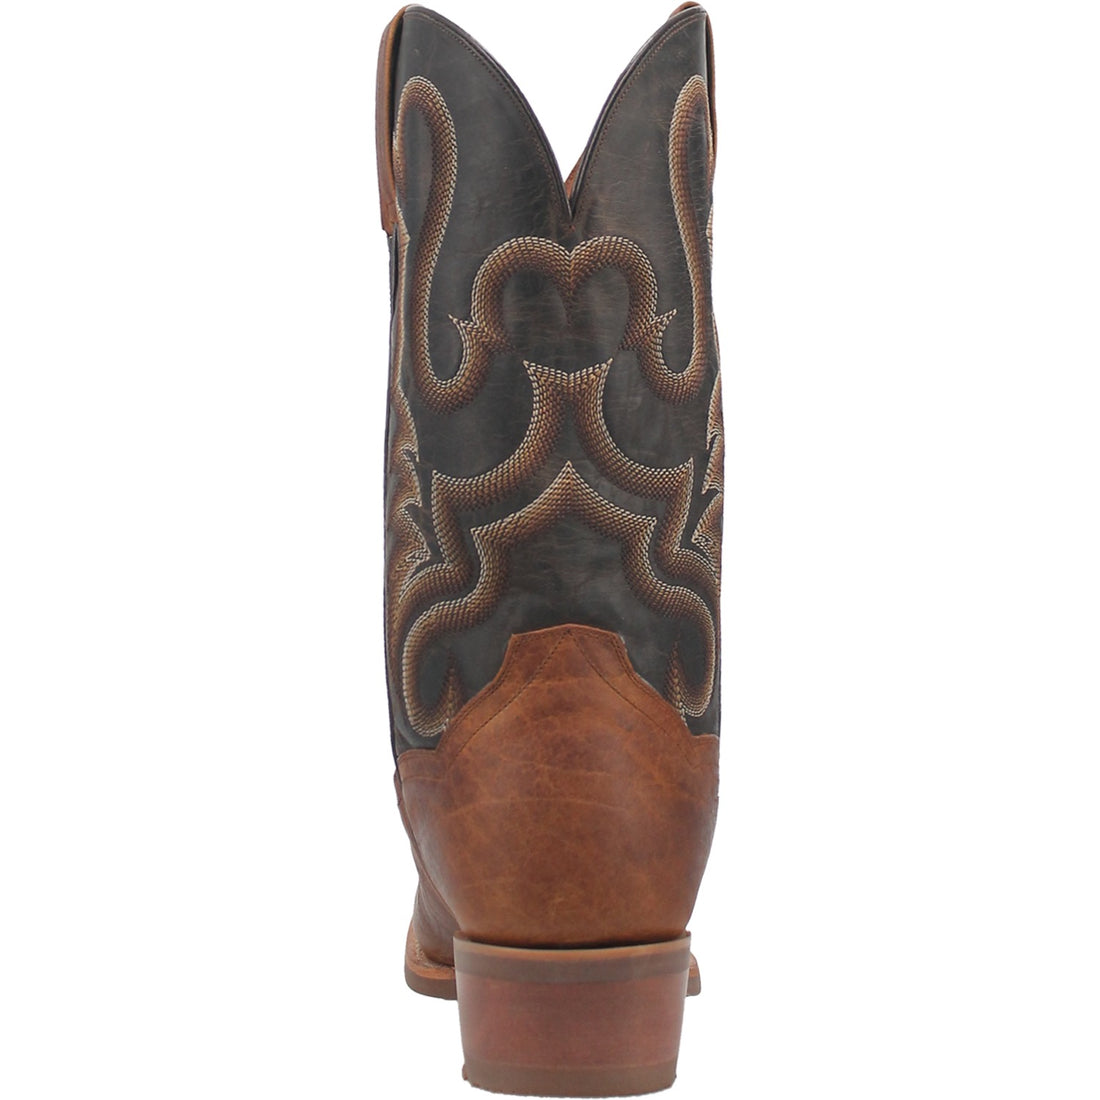 RICHLAND BISON LEATHER BOOT Preview #4